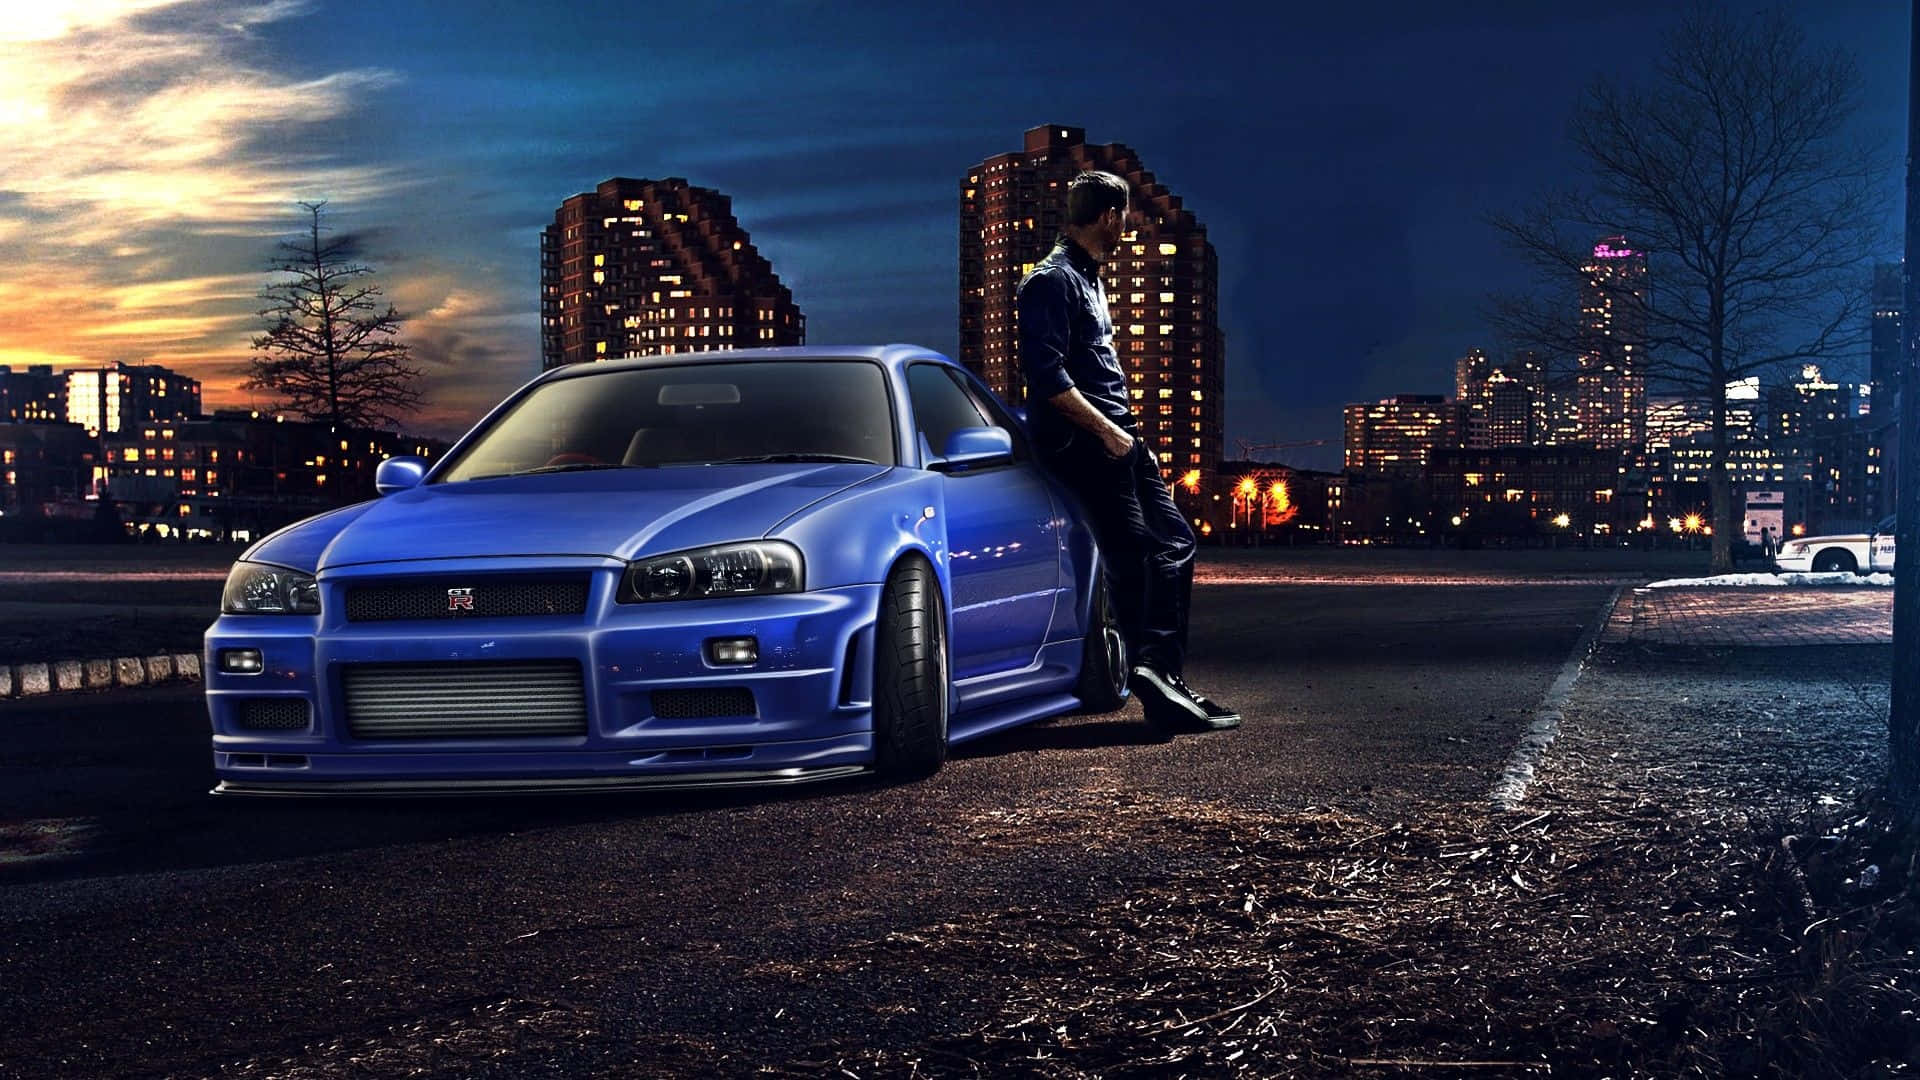 Cool Nissan Skyline With A Man Leaning On Its Side Wallpaper